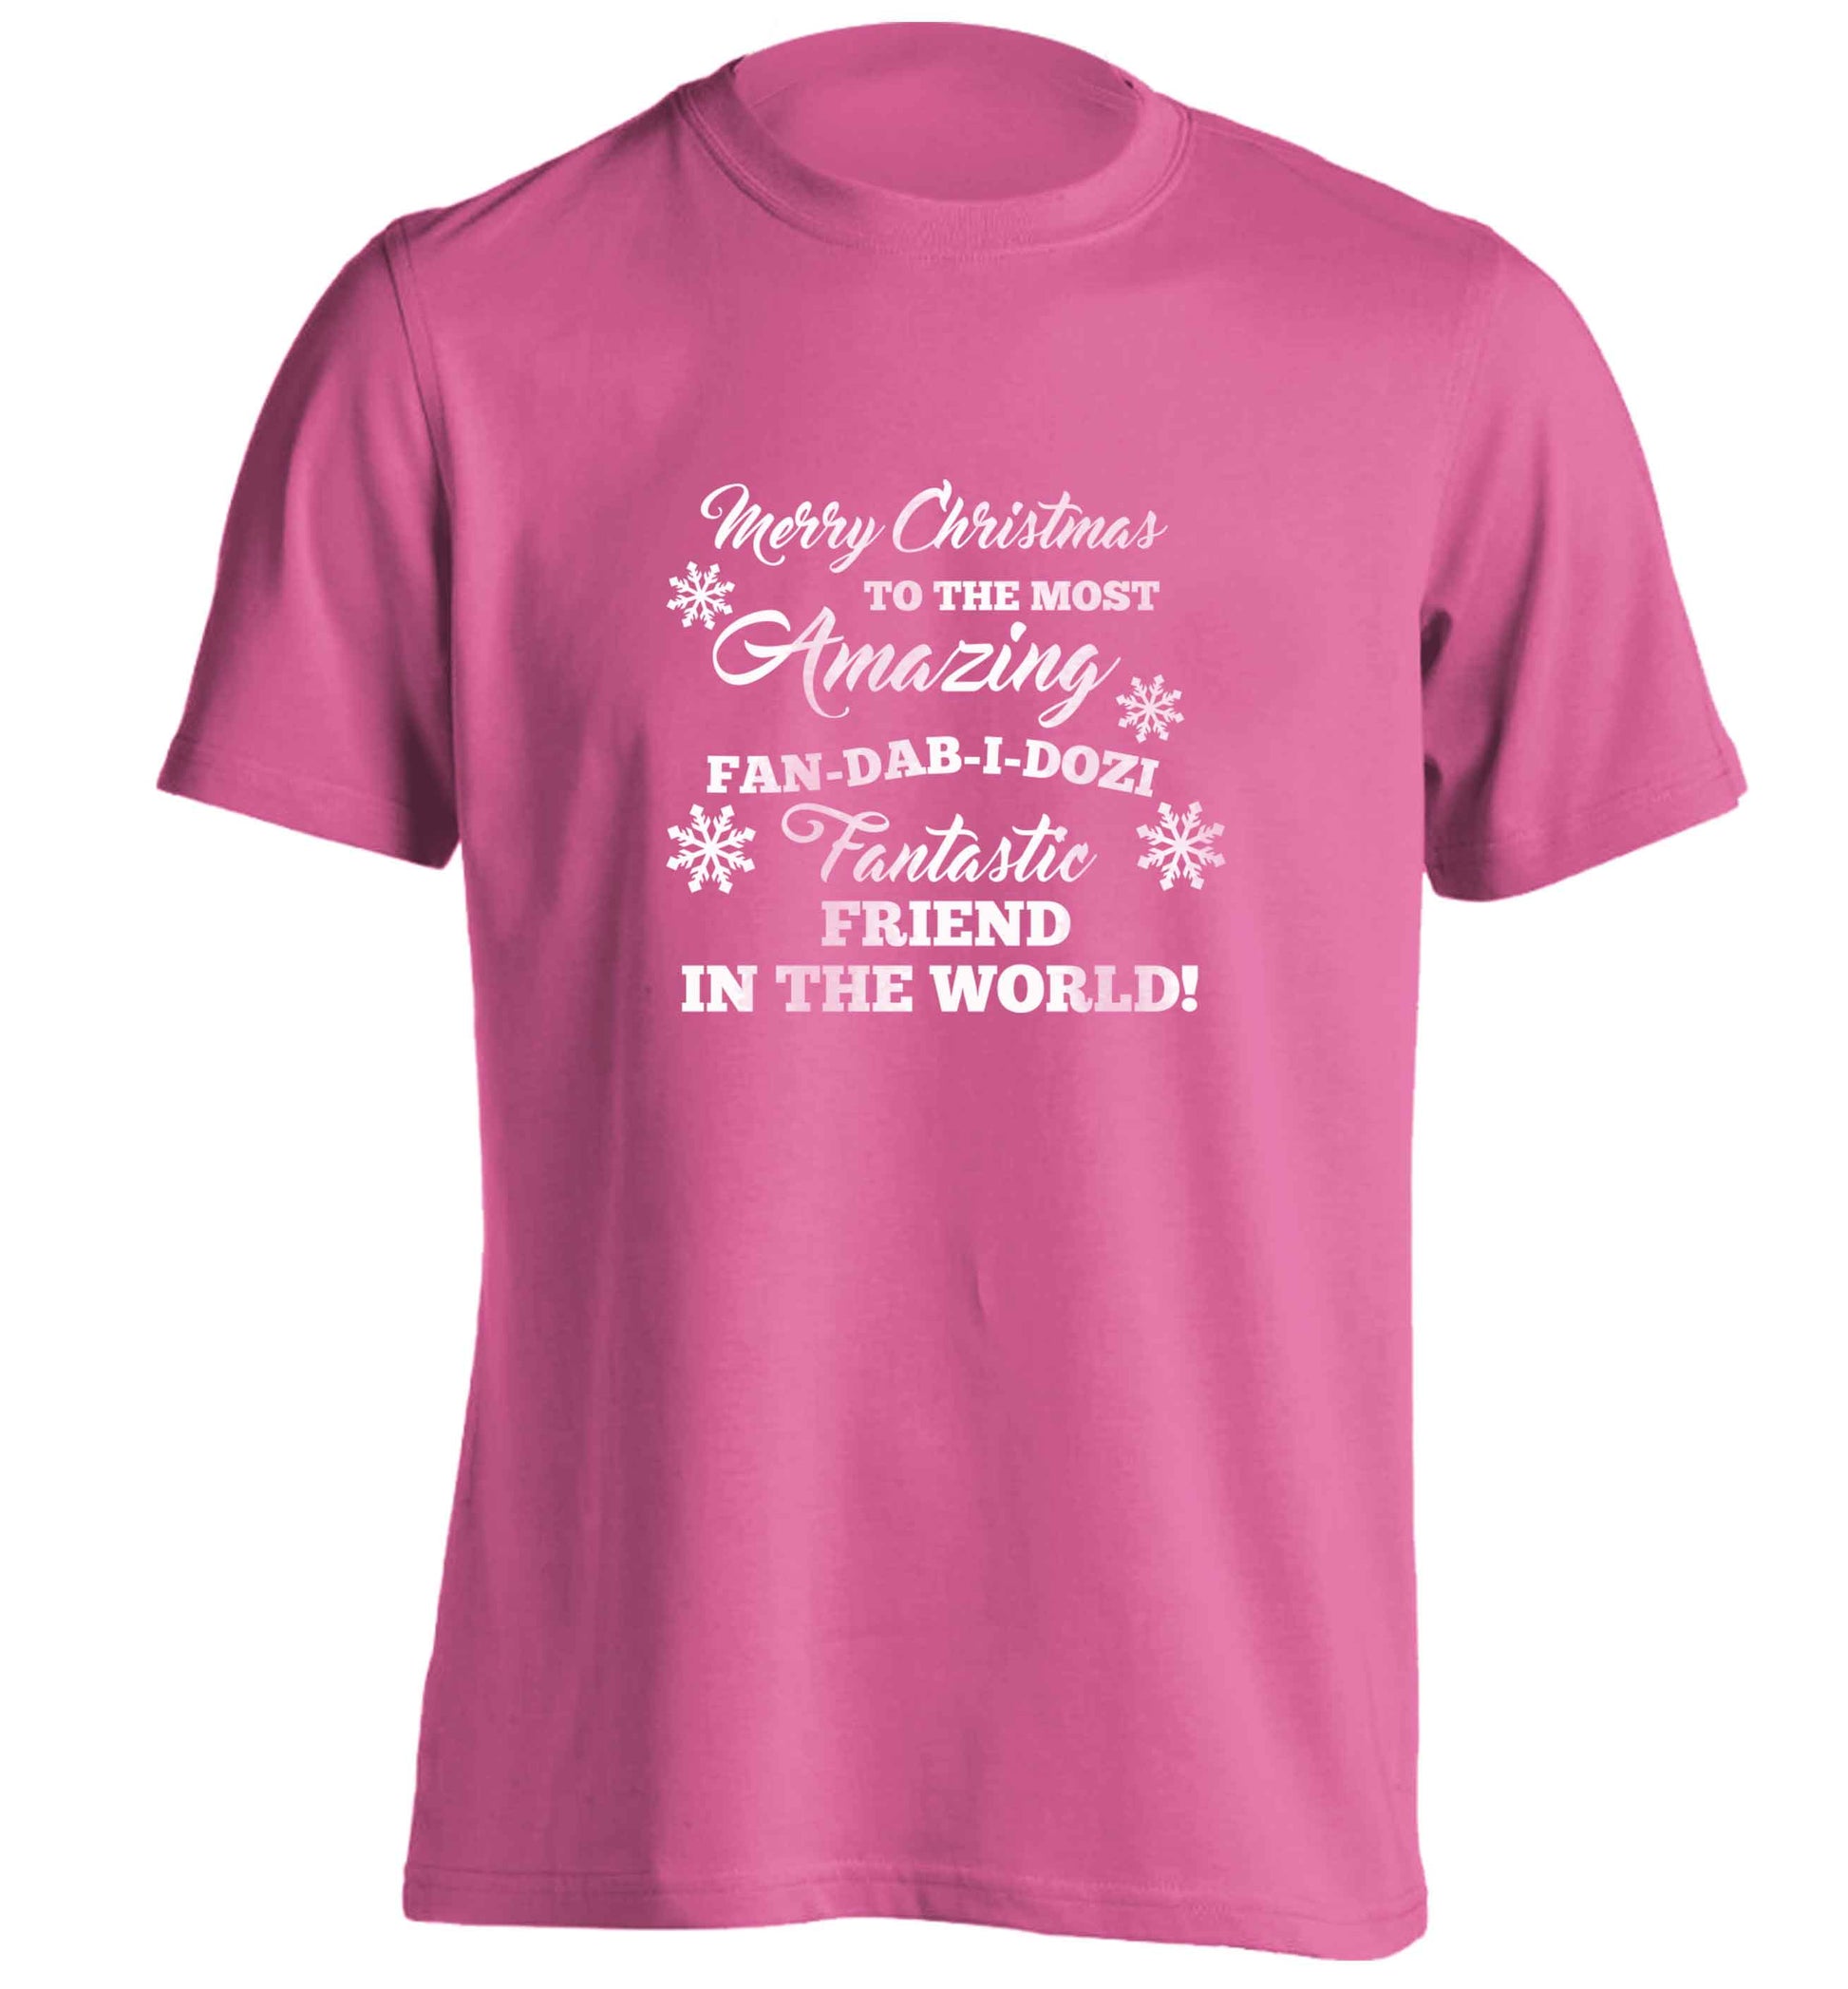 Merry Christmas to the most amazing fan-dab-i-dozi fantasic friend in the world adults unisex pink Tshirt 2XL